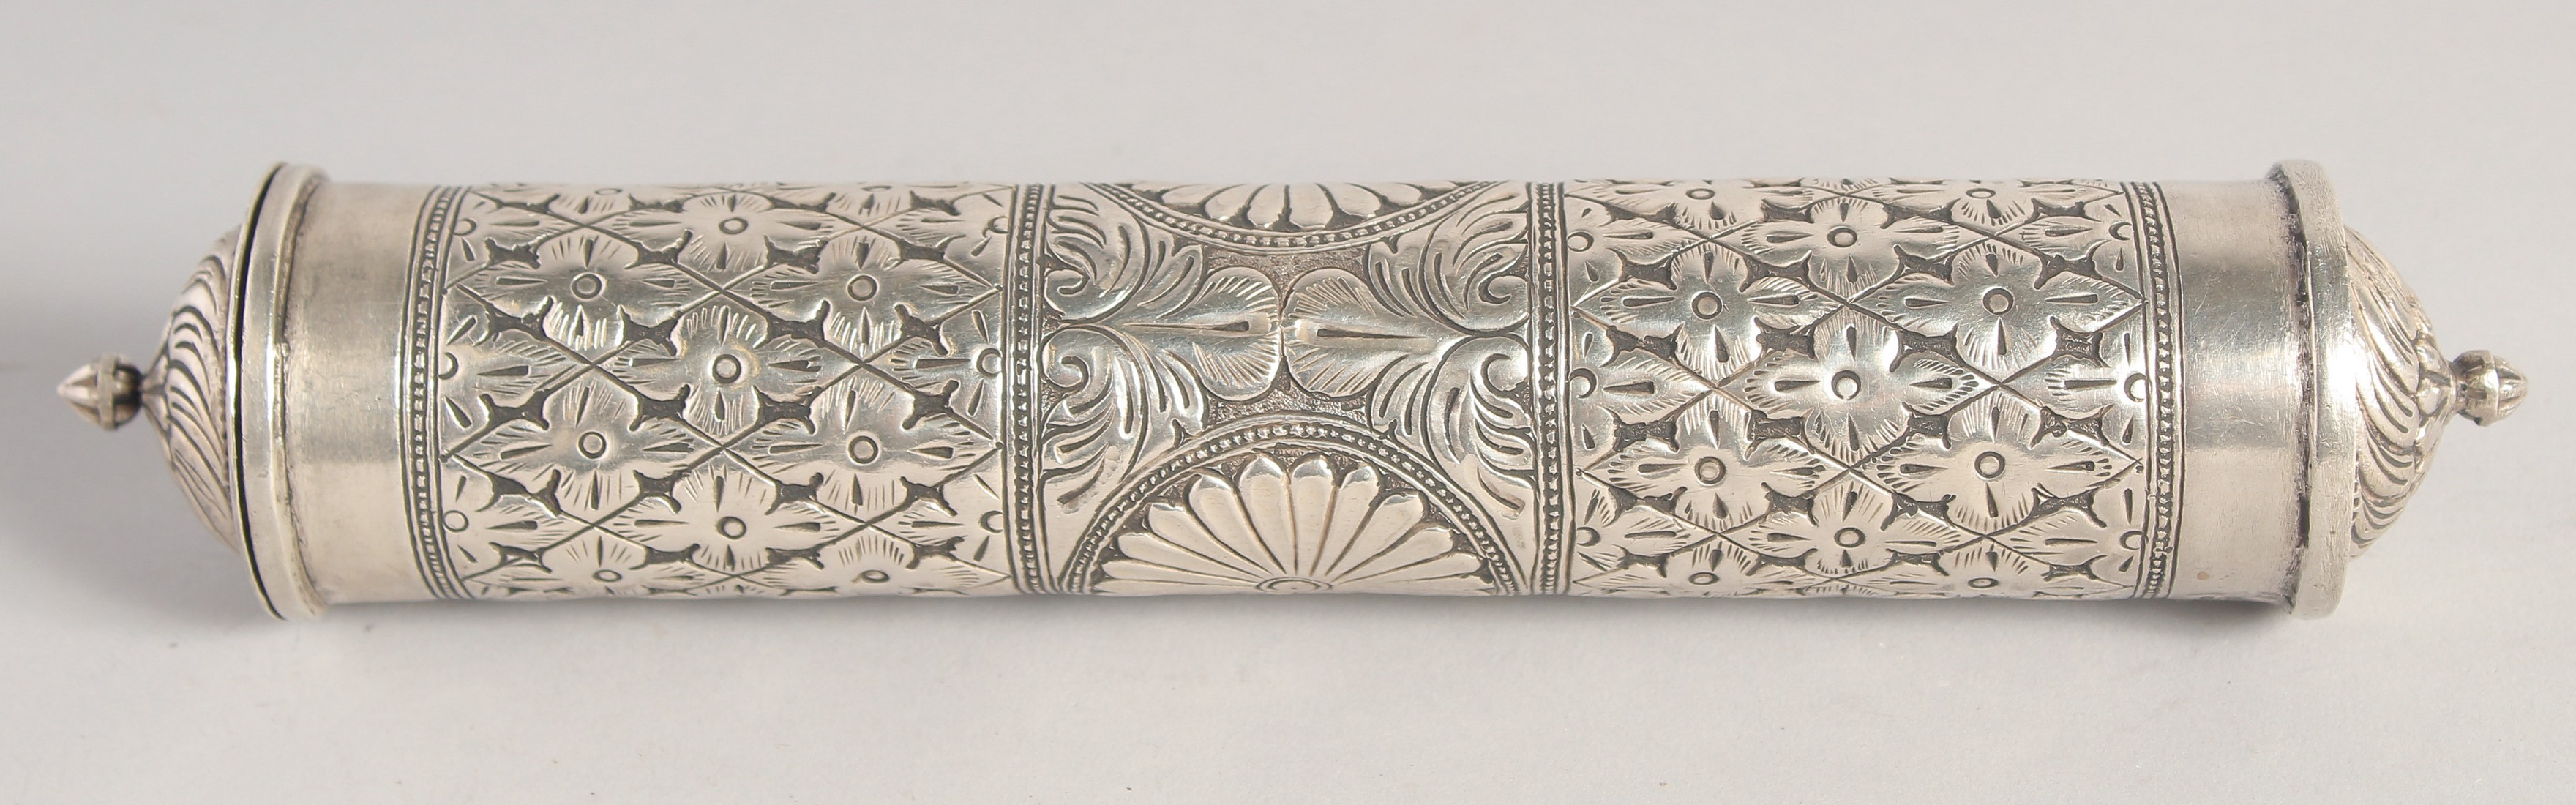 AN ISLAMIC WHITE METAL CYLINDRICAL QURAN / SCROLL CASE, with repousse stylised flower head - Image 4 of 6